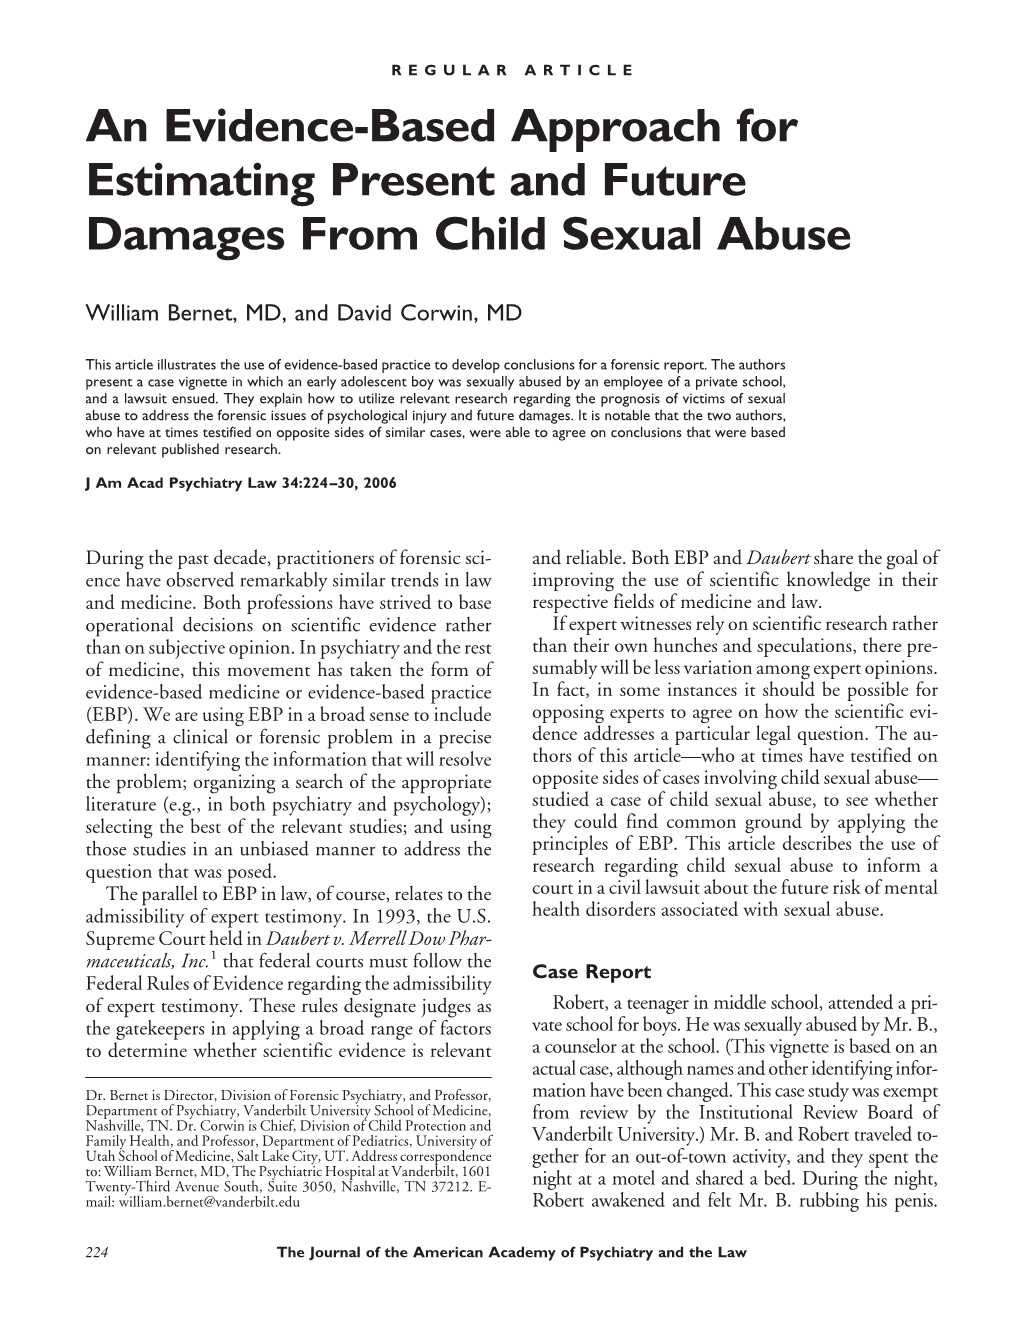 An Evidence-Based Approach for Estimating Present and Future Damages from Child Sexual Abuse